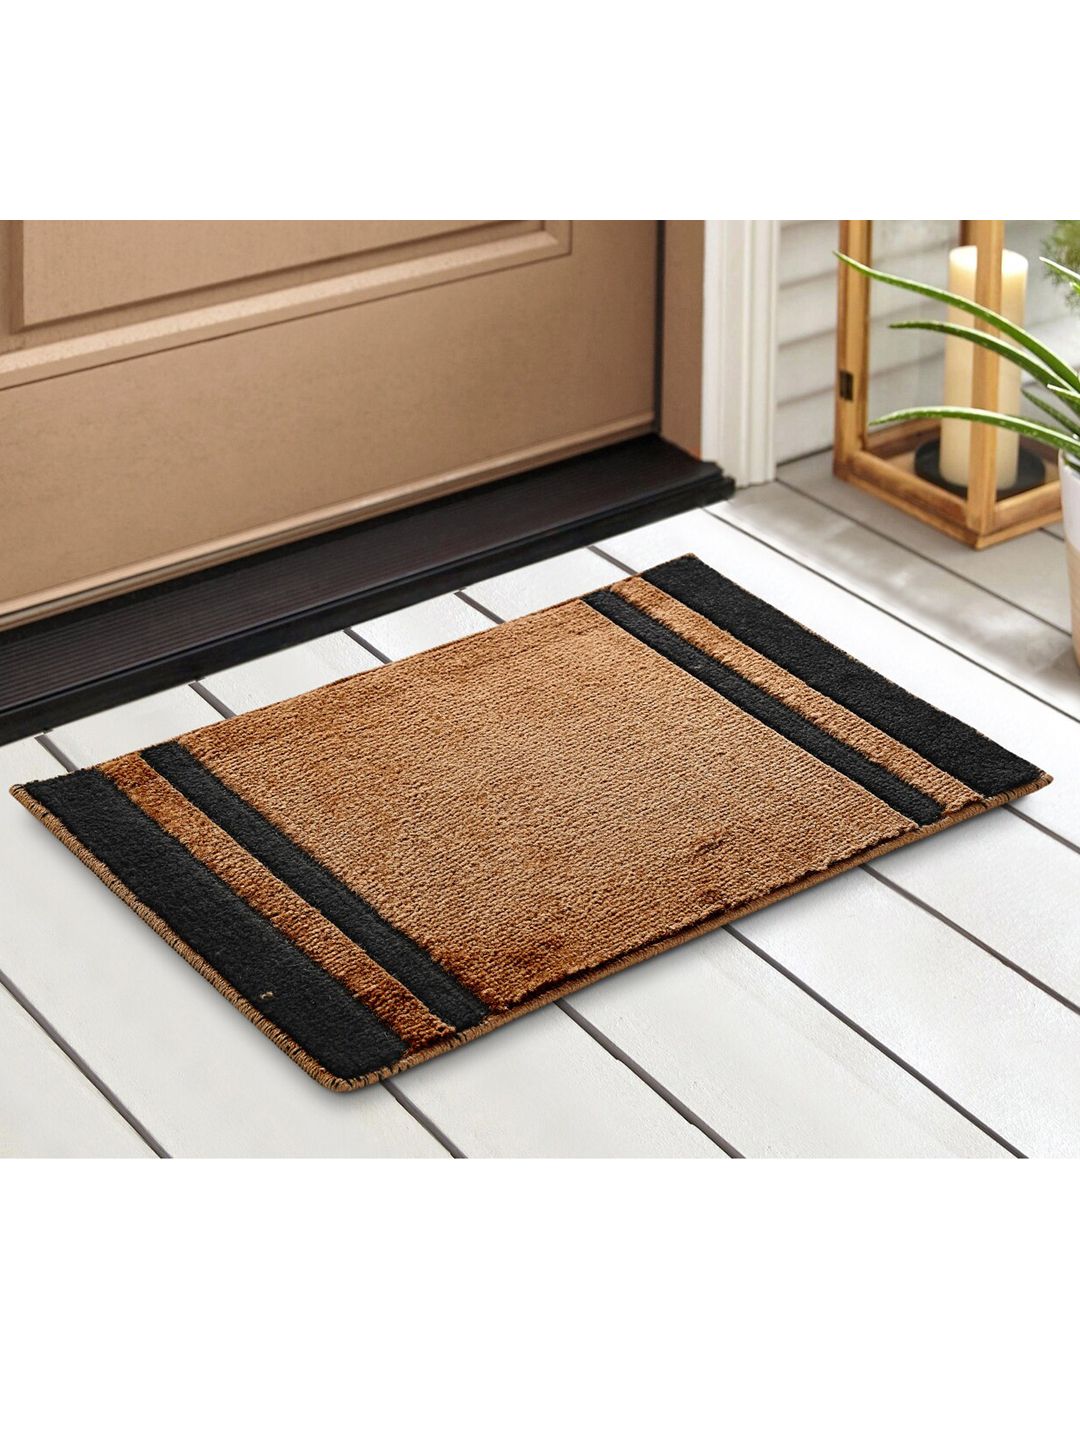 Saral Home Set Of 2 Striped Cotton Anti-Skid Door Mats Price in India